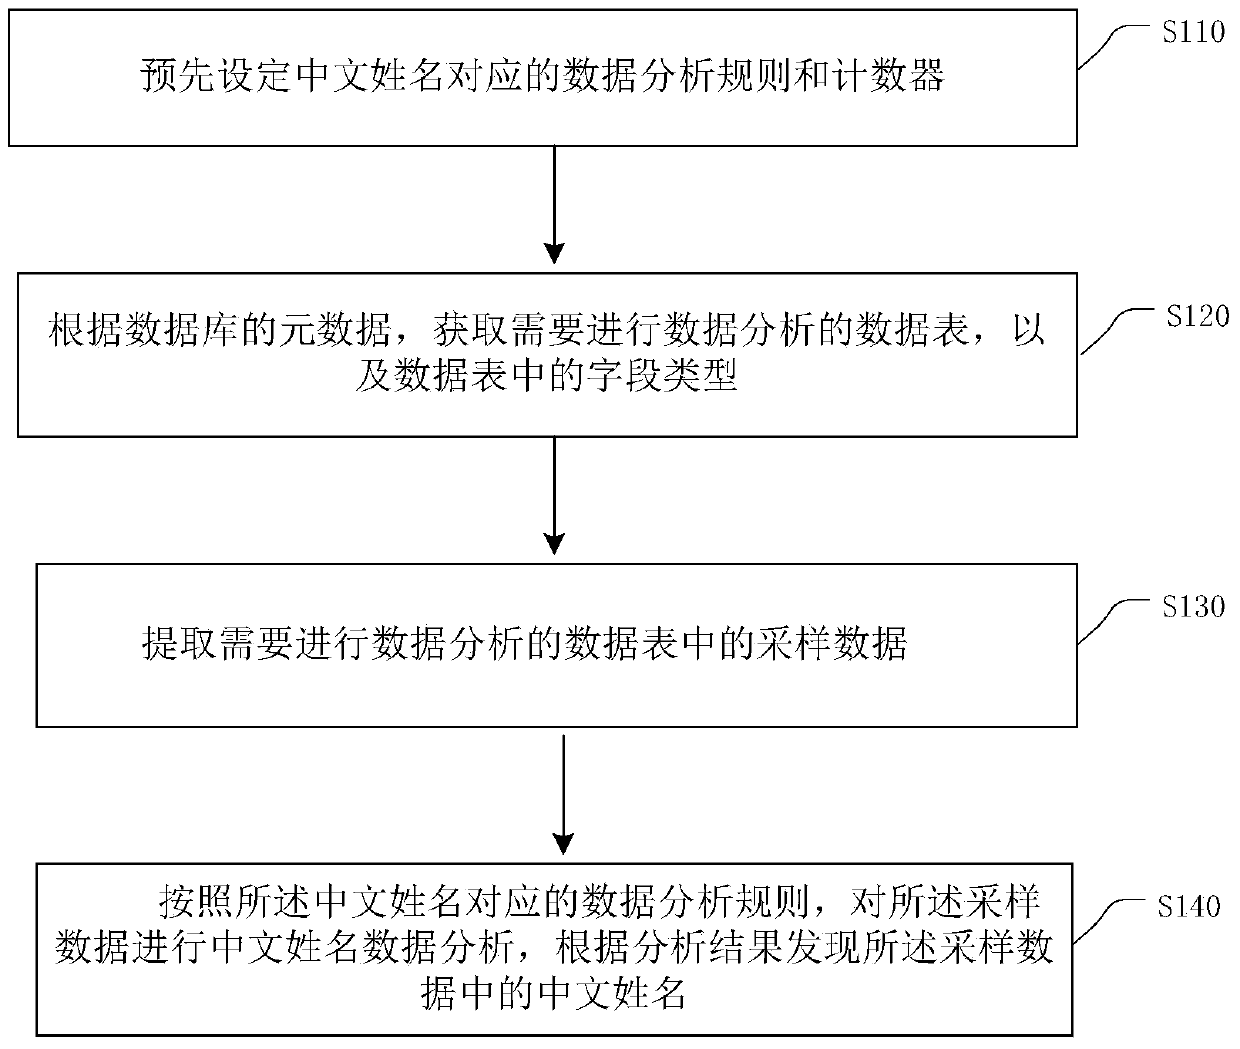 Discovery and Classification Method of Chinese Name Data